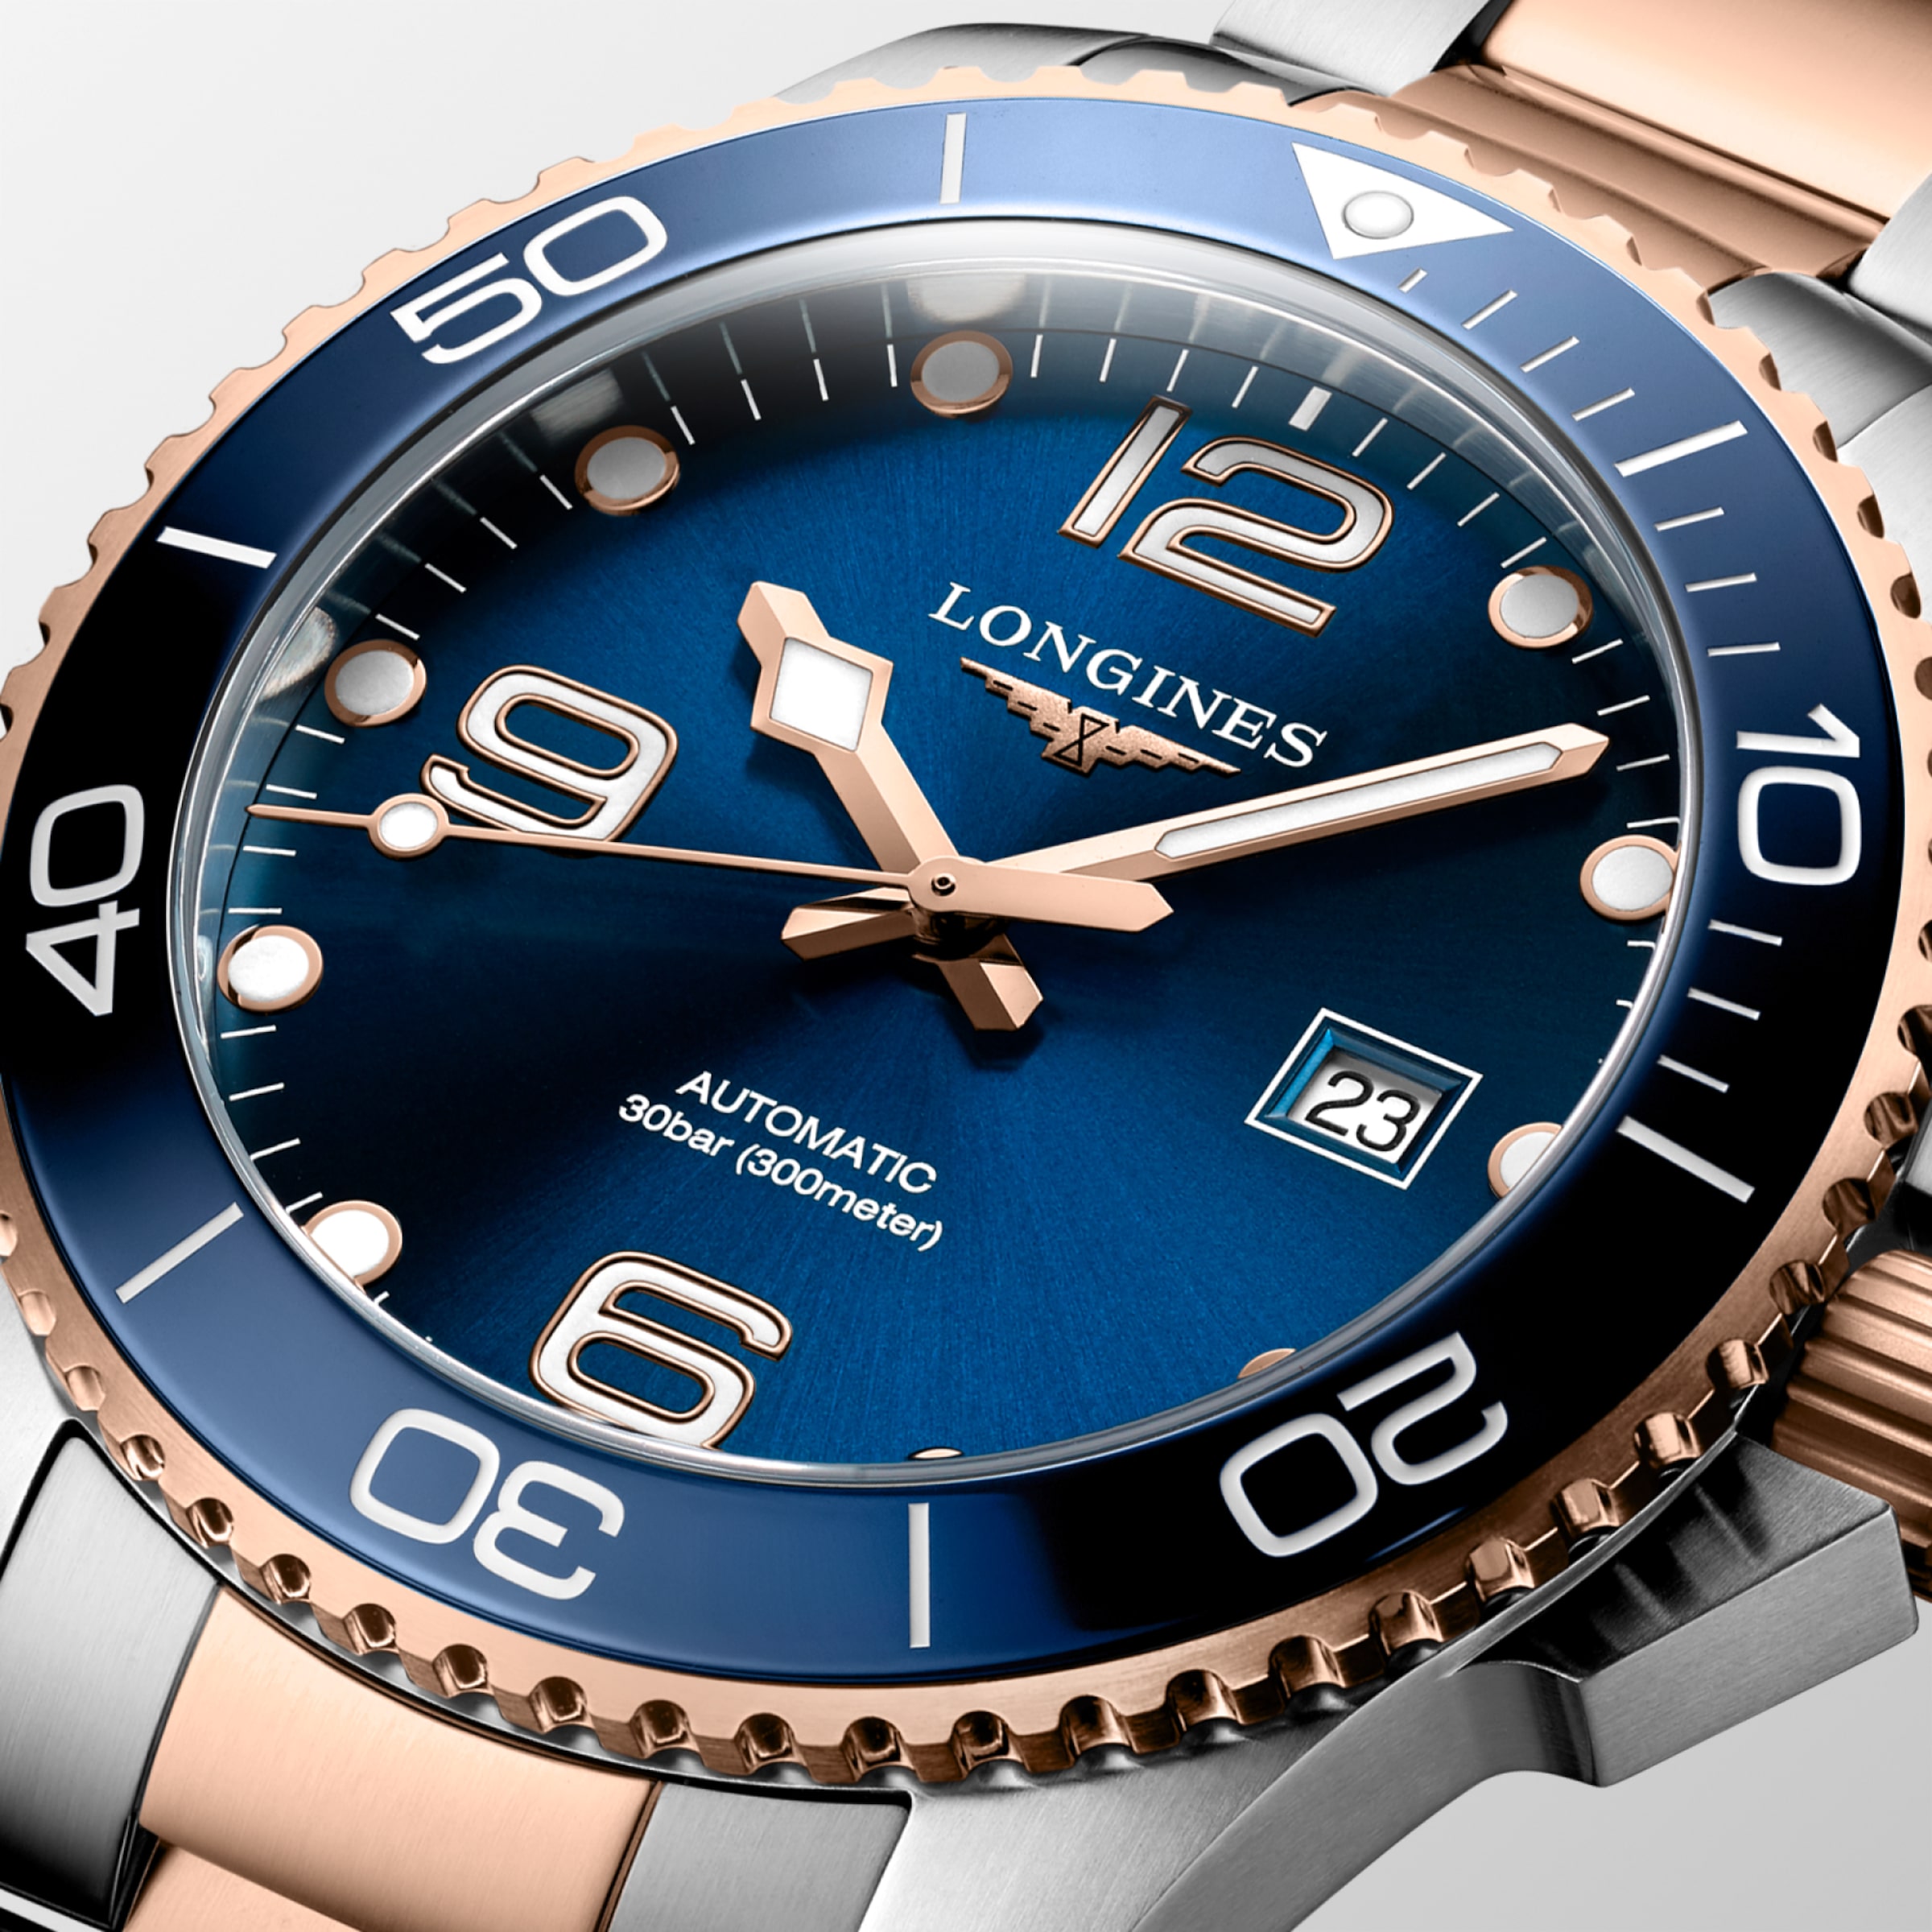 Longines HYDROCONQUEST Automatic Stainless steel and ceramic bezel Watch - L3.782.3.98.7